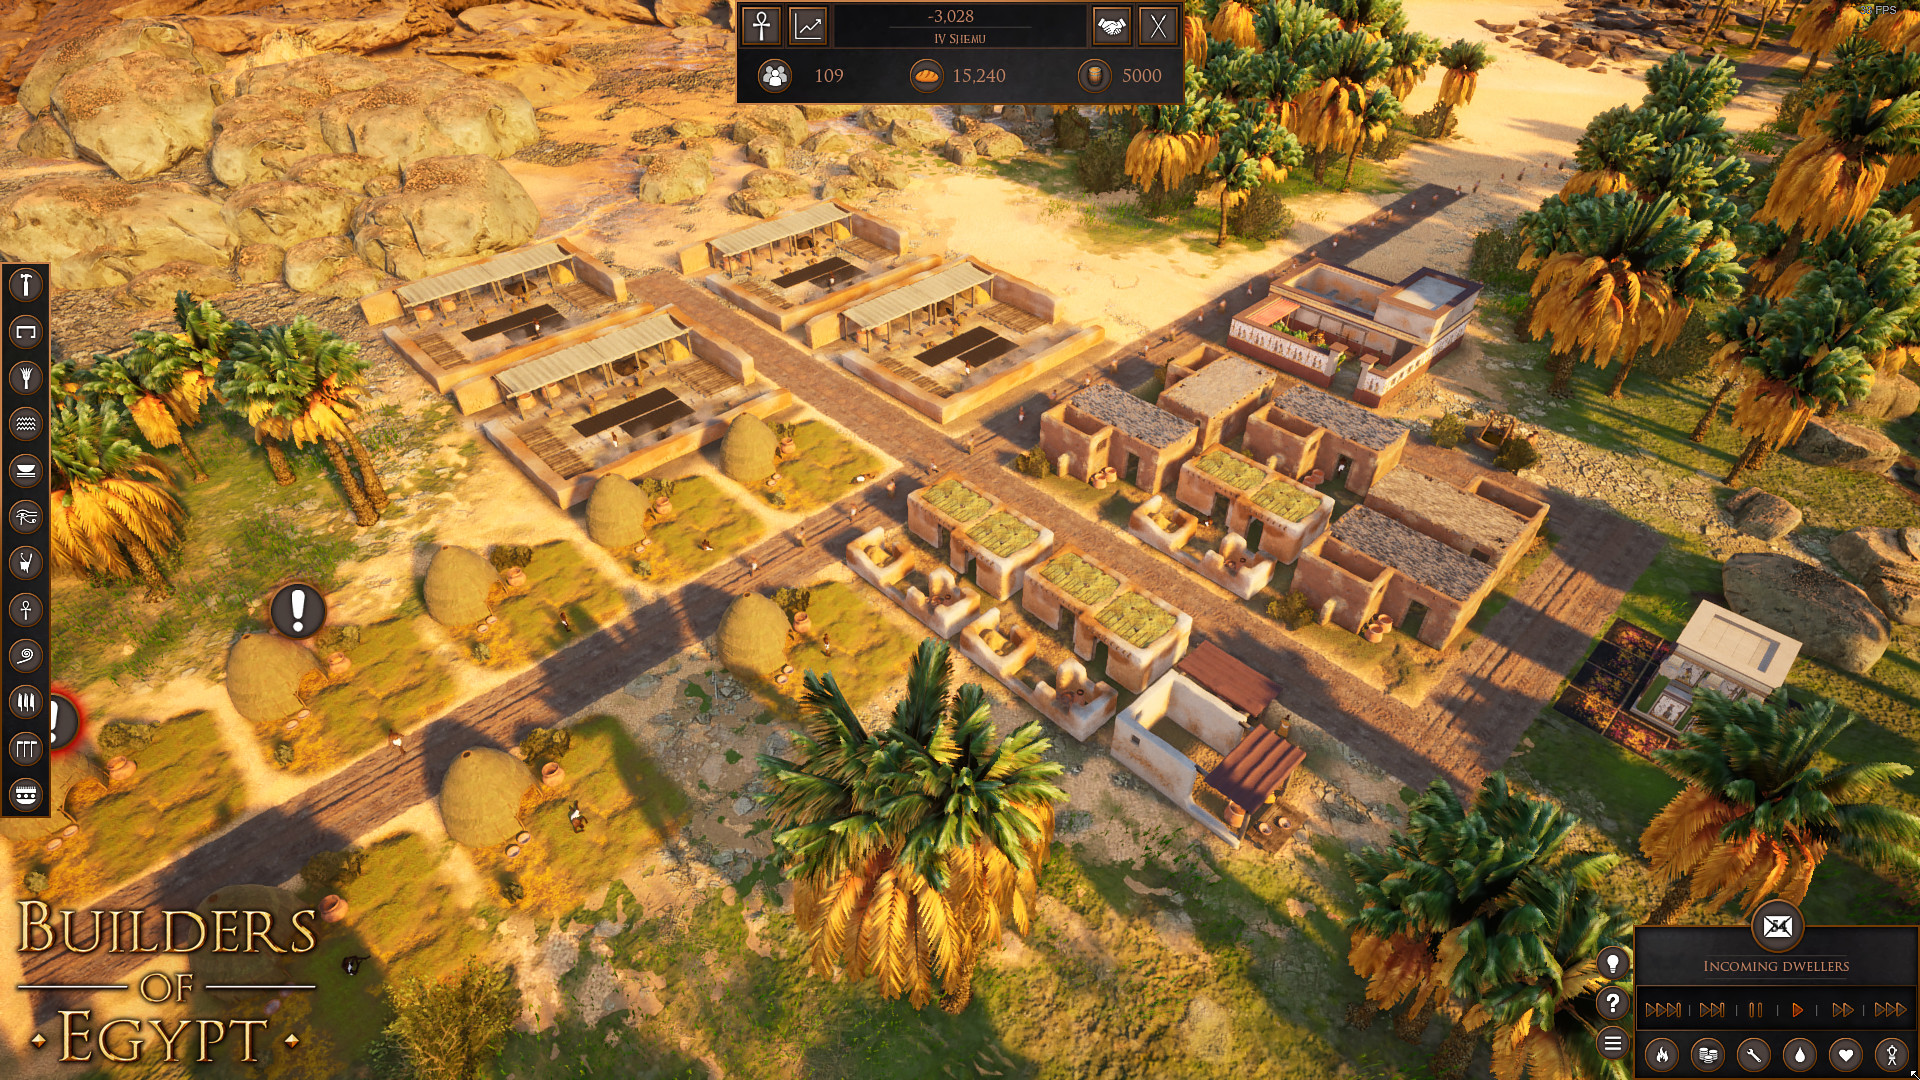 Builders of Egypt on Steam